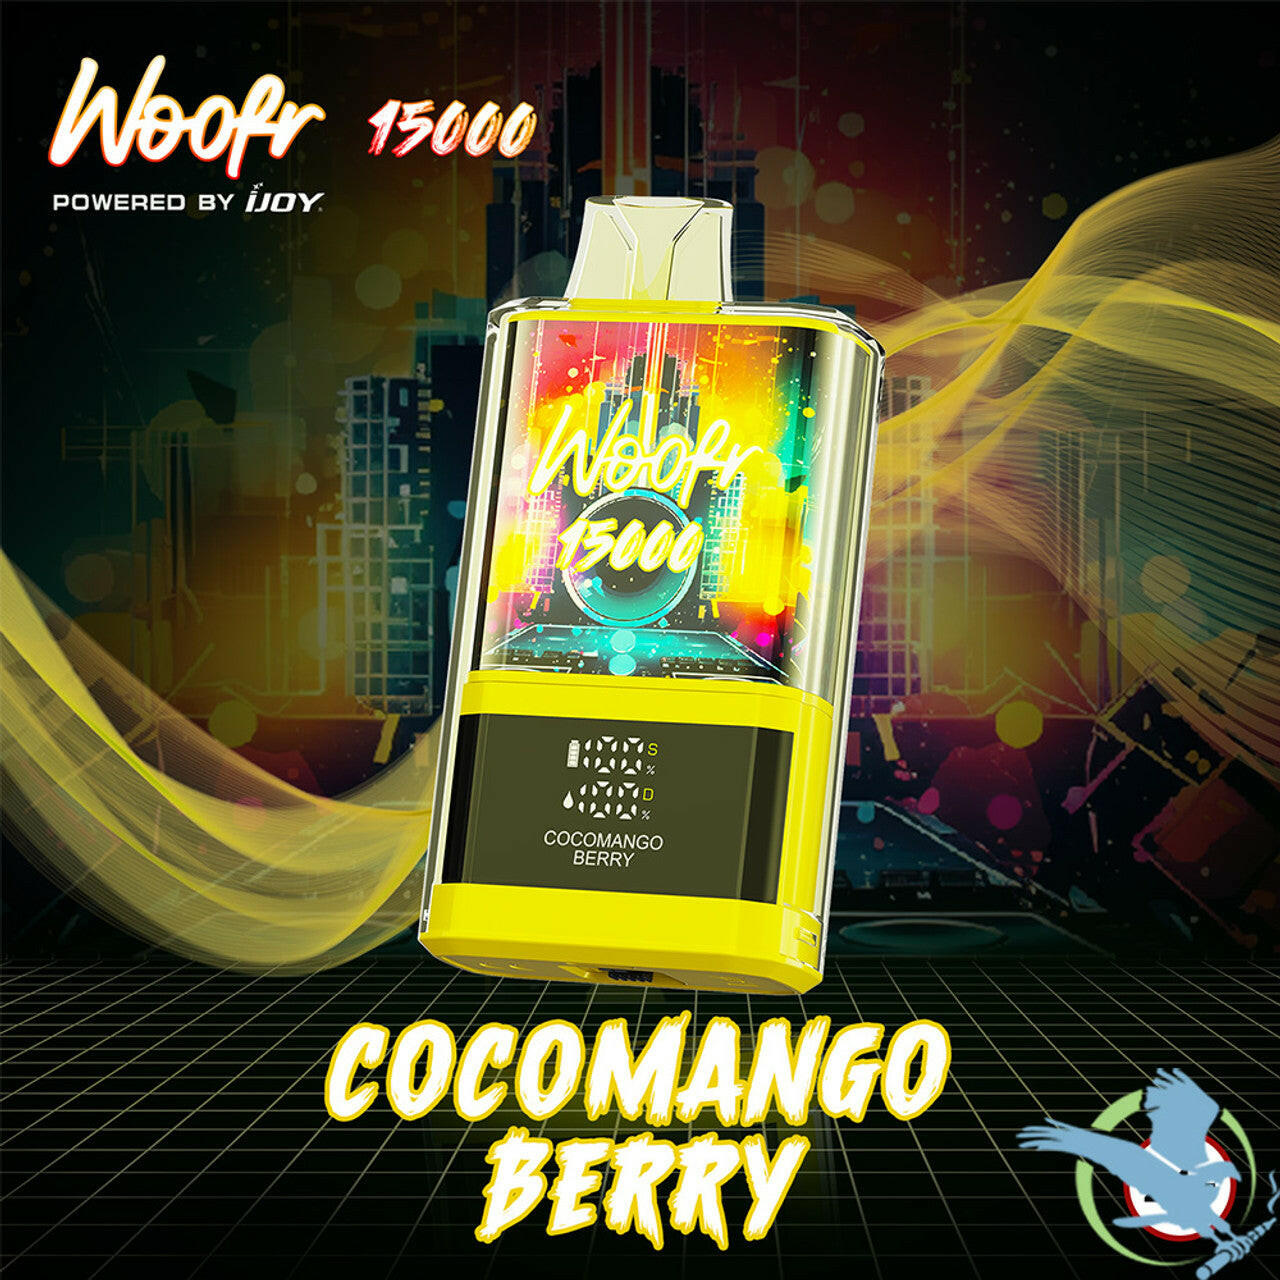 Woofr 15000 Disposable - Cocomango Berry